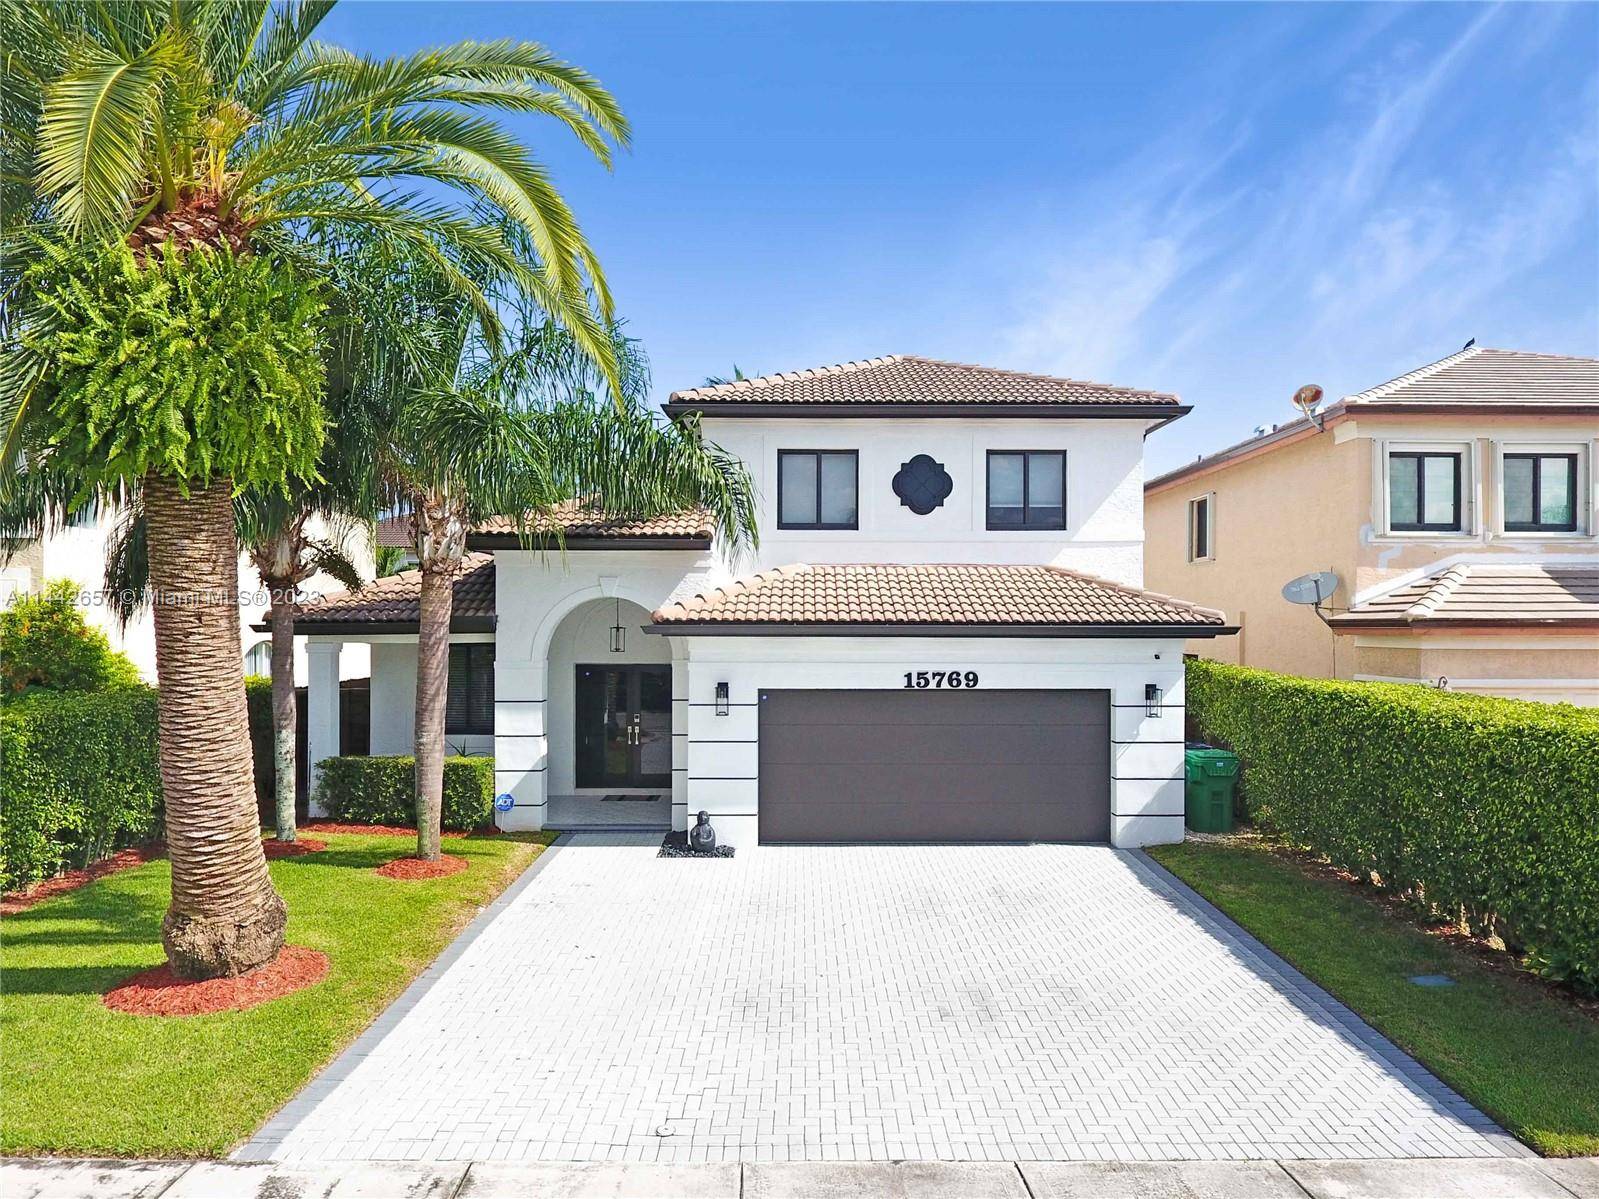 Just perfect ! Absolutely flawless upscale estate home located in the West Kendall corridor.